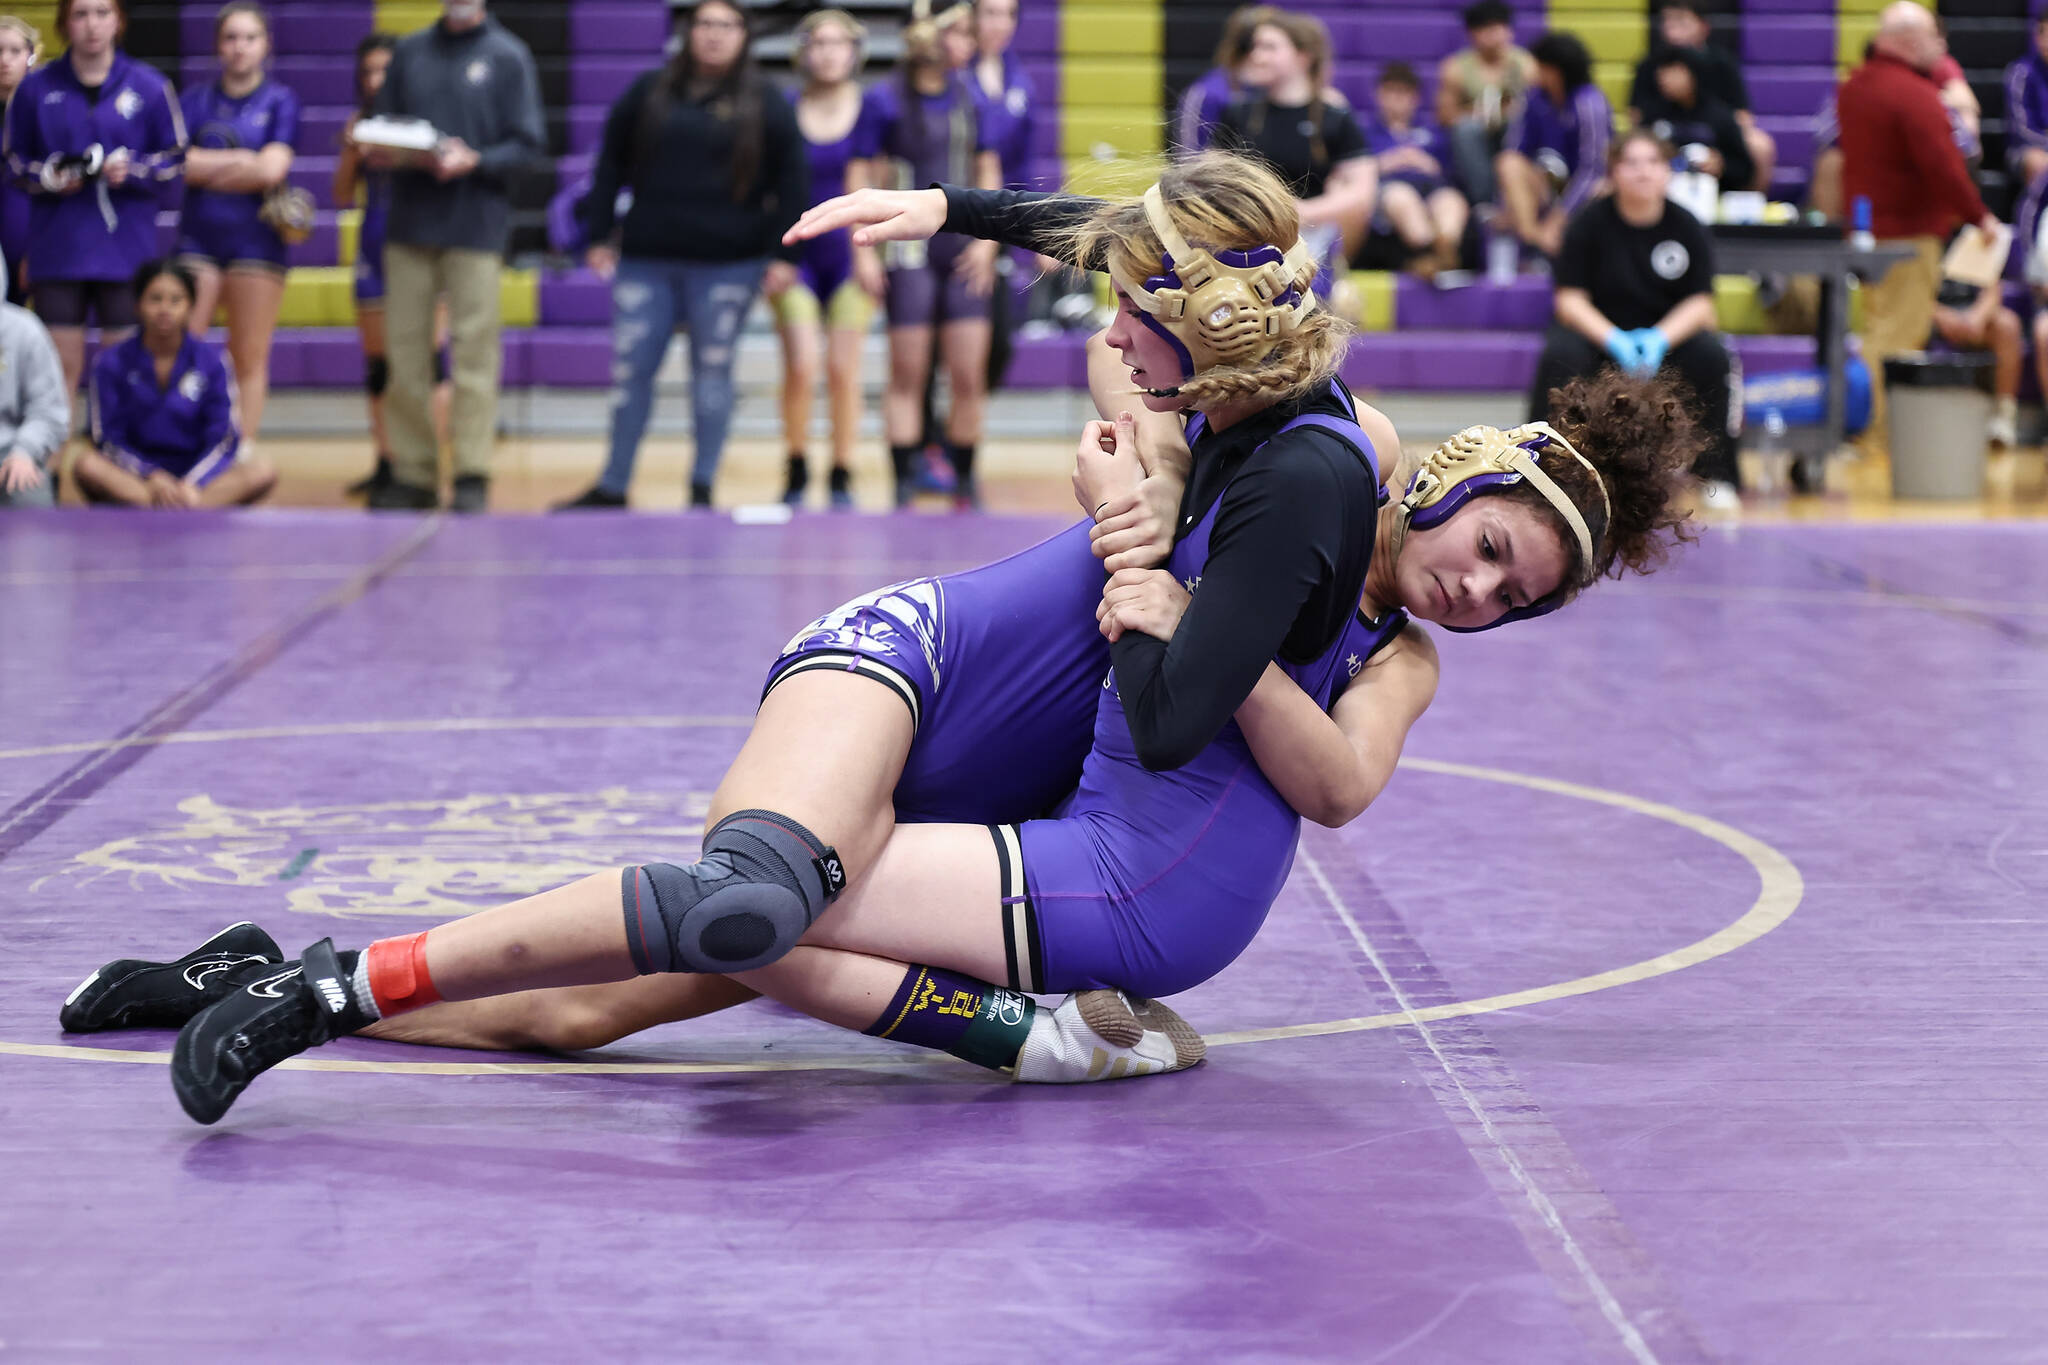 Oak Harbor wrestlers Carla Turner and Genesis Egli compete during the Purple and Gold event Thursday night at Oak Harbor High School’s gym. (Photo by John Fisken)